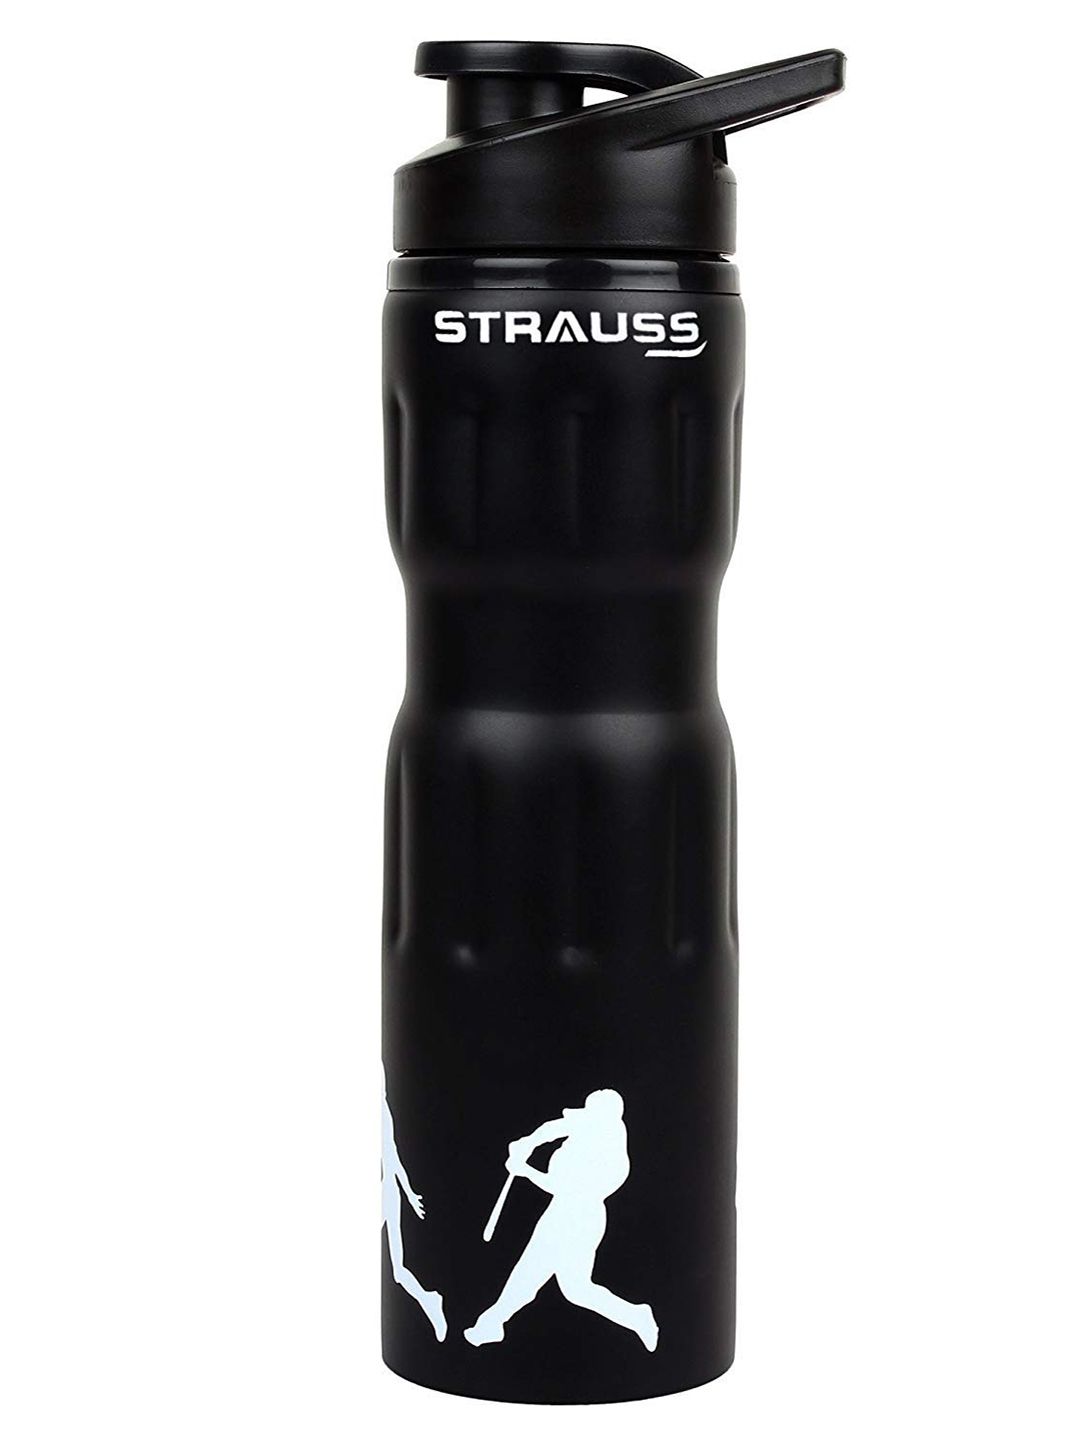 STRAUSS Black Printed Water Bottle Price in India